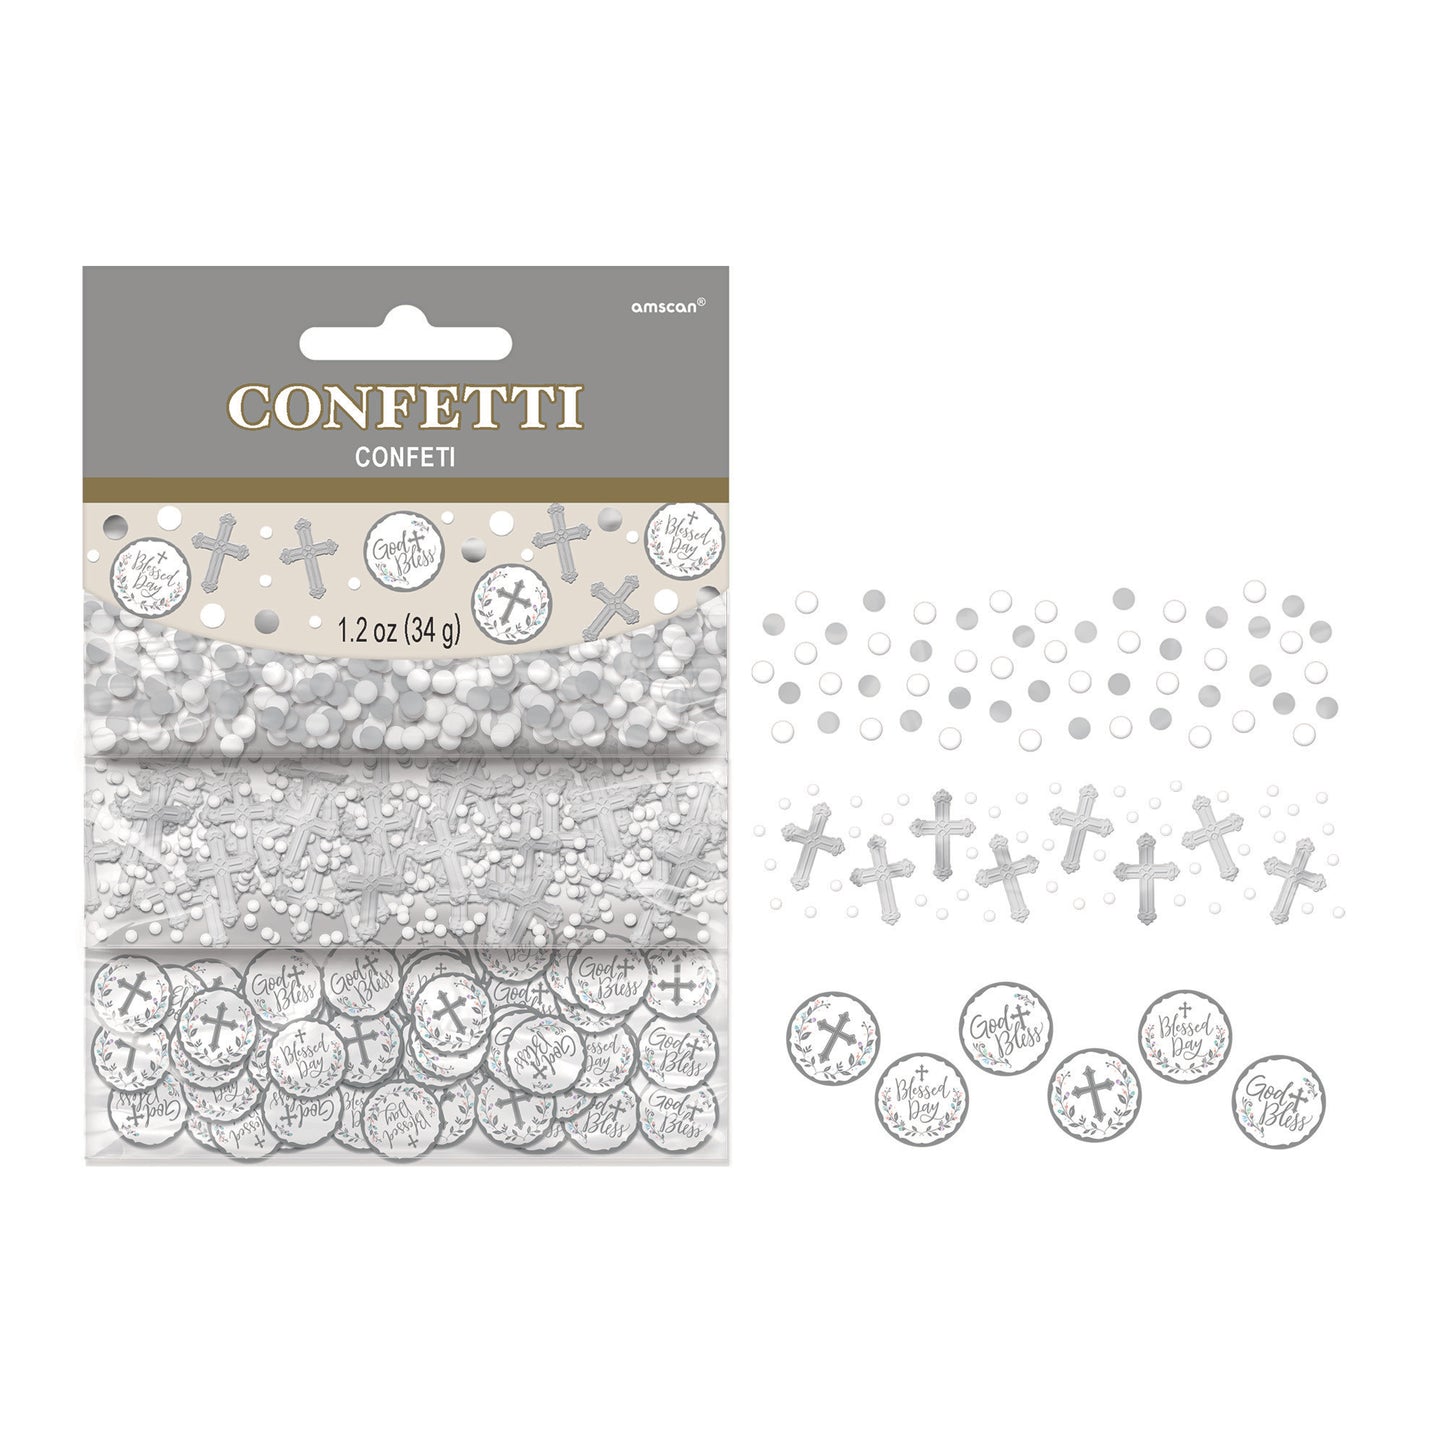 Holy Day Value Confetti, 1-pc